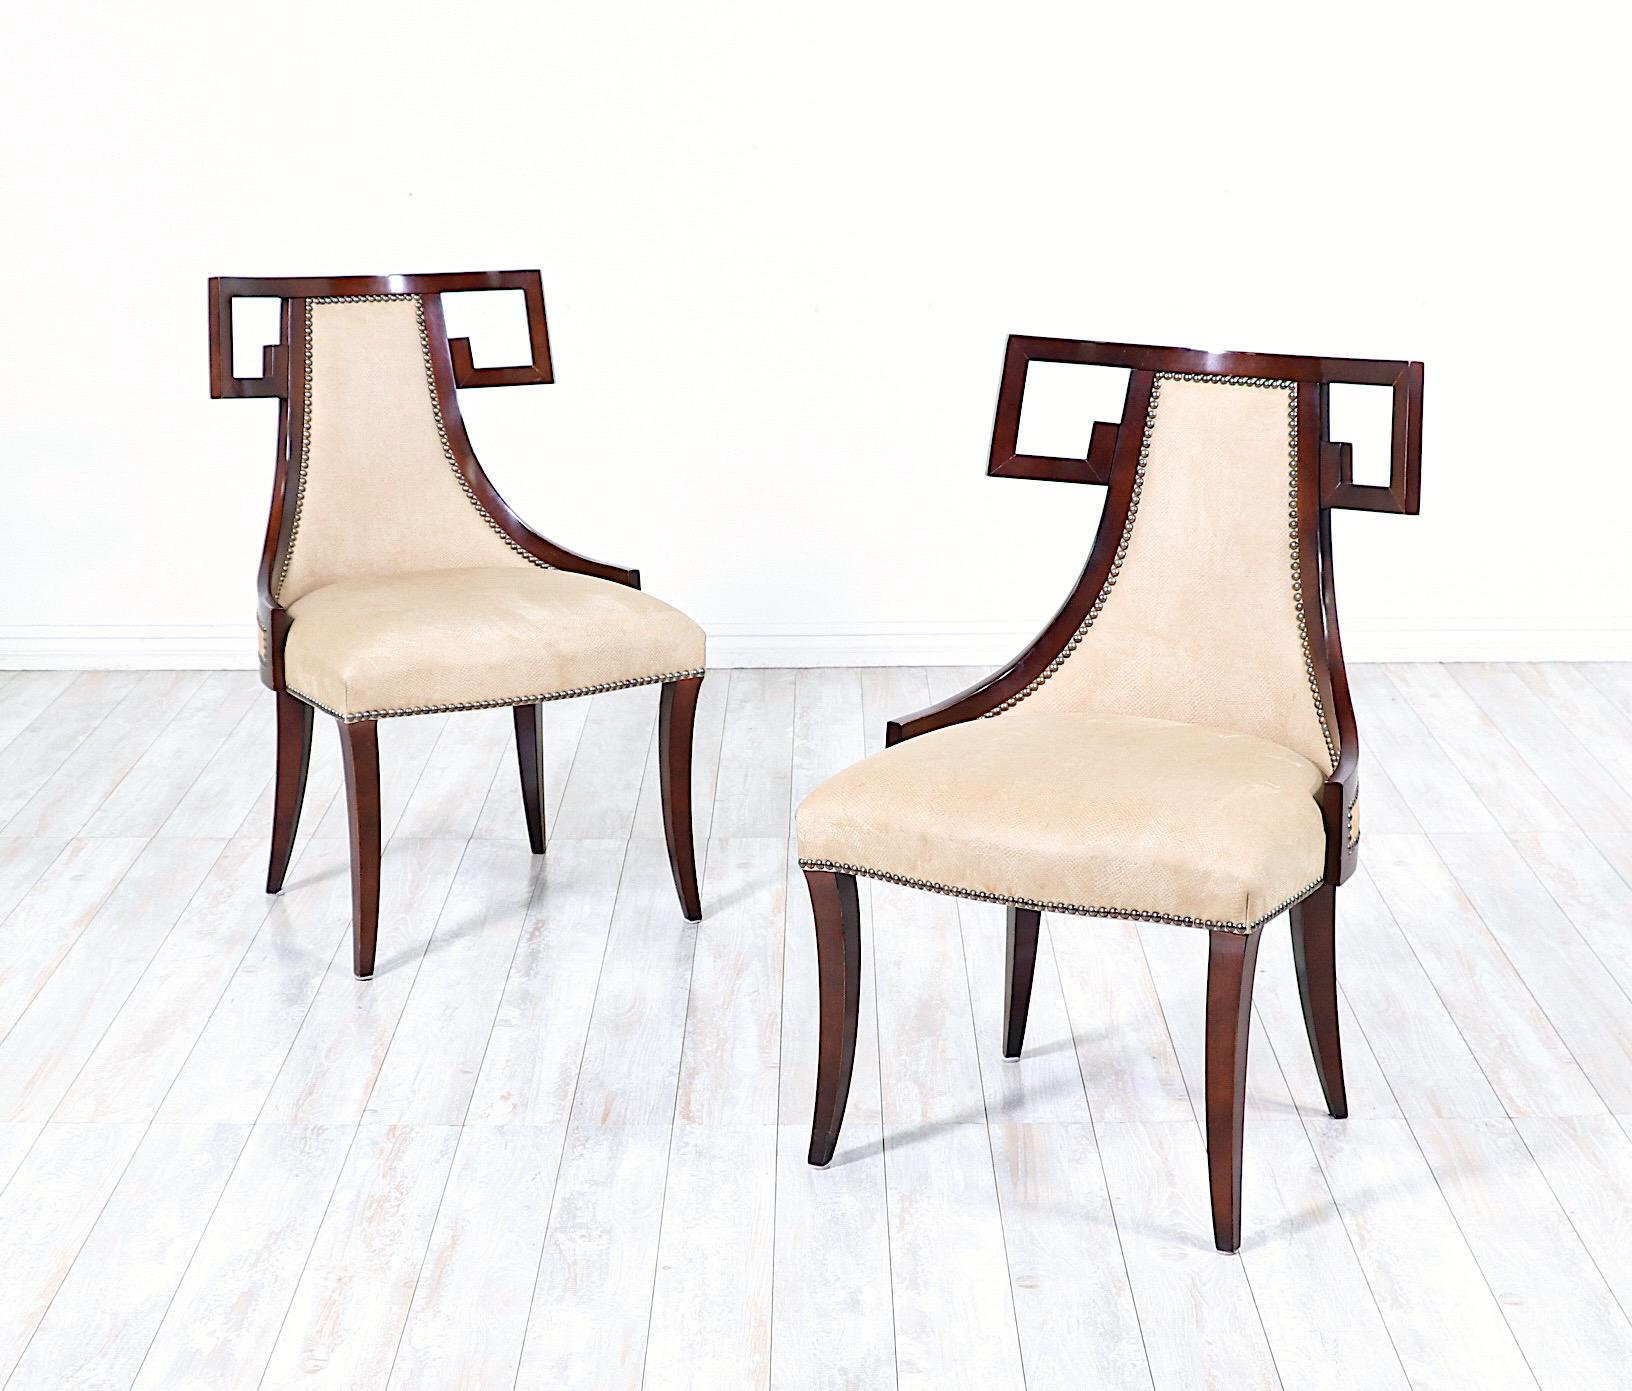 Neoclassical Set of Four “Greek” Dining Chairs by Baker Furniture